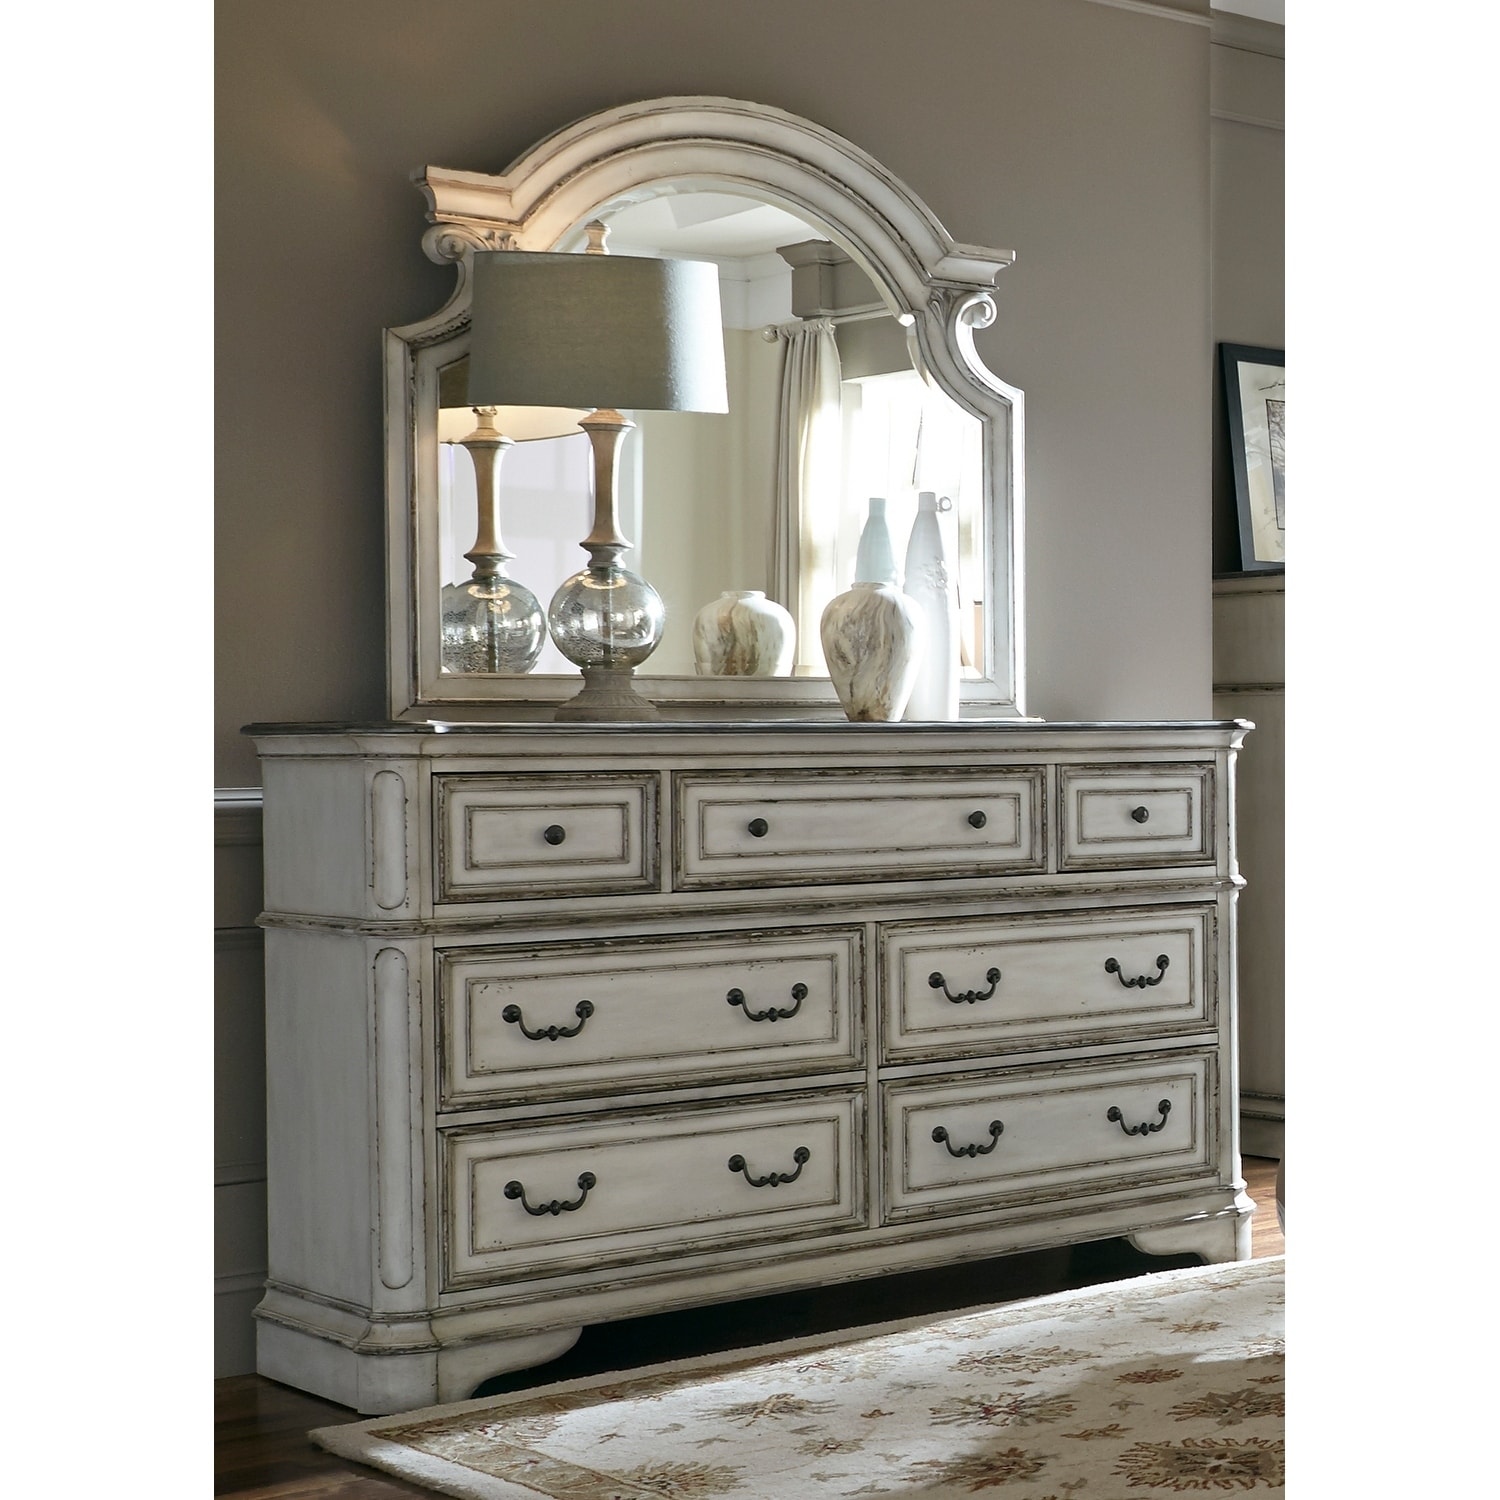 Shop Magnolia Manor Antique White 7 Drawer Dresser And Scroll